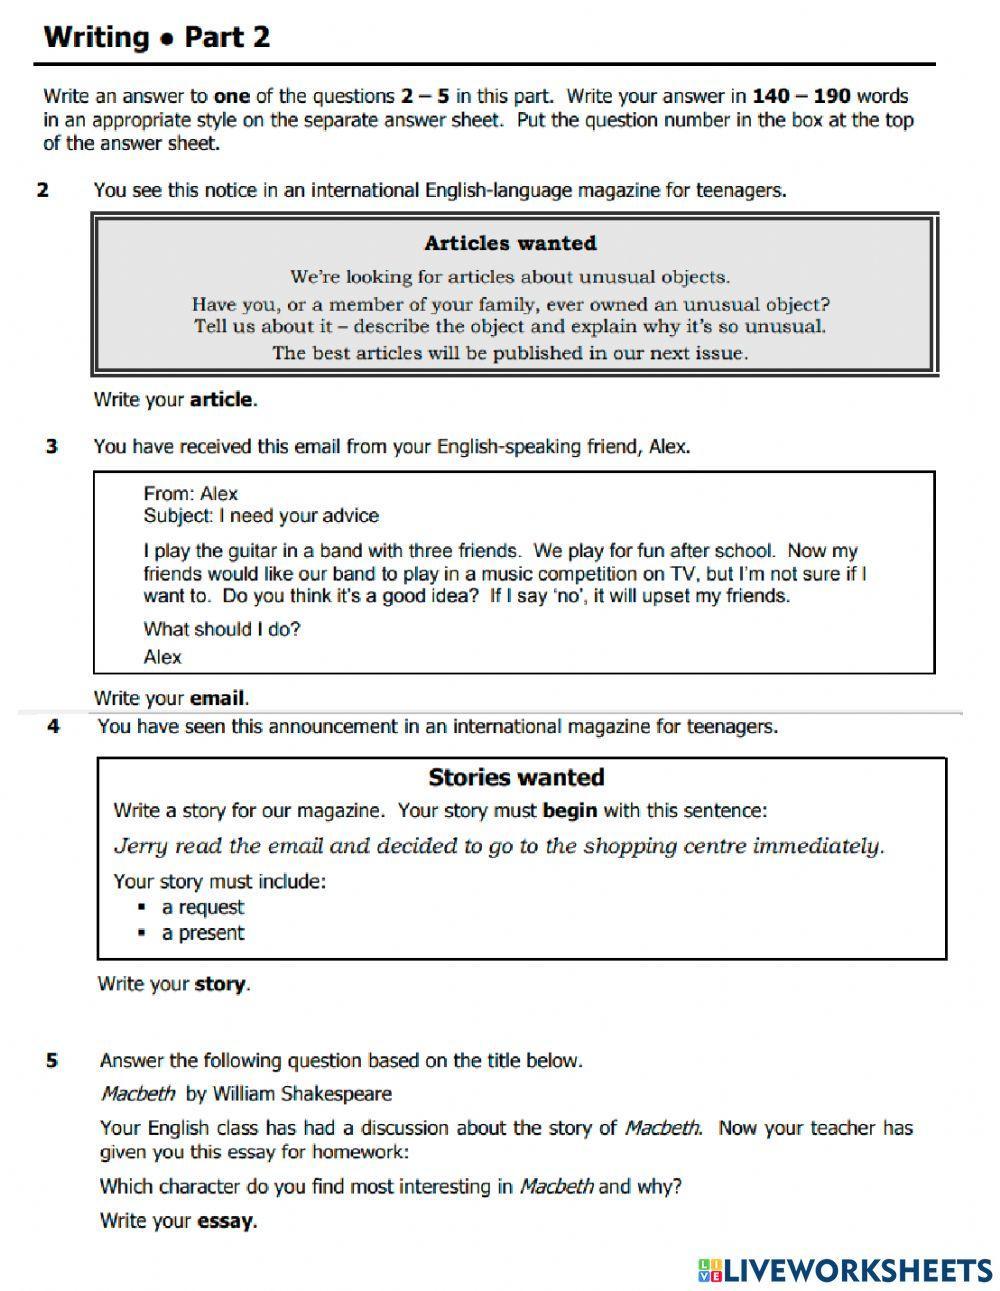 Writing FCE Part 1 and 2 worksheet | Live Worksheets